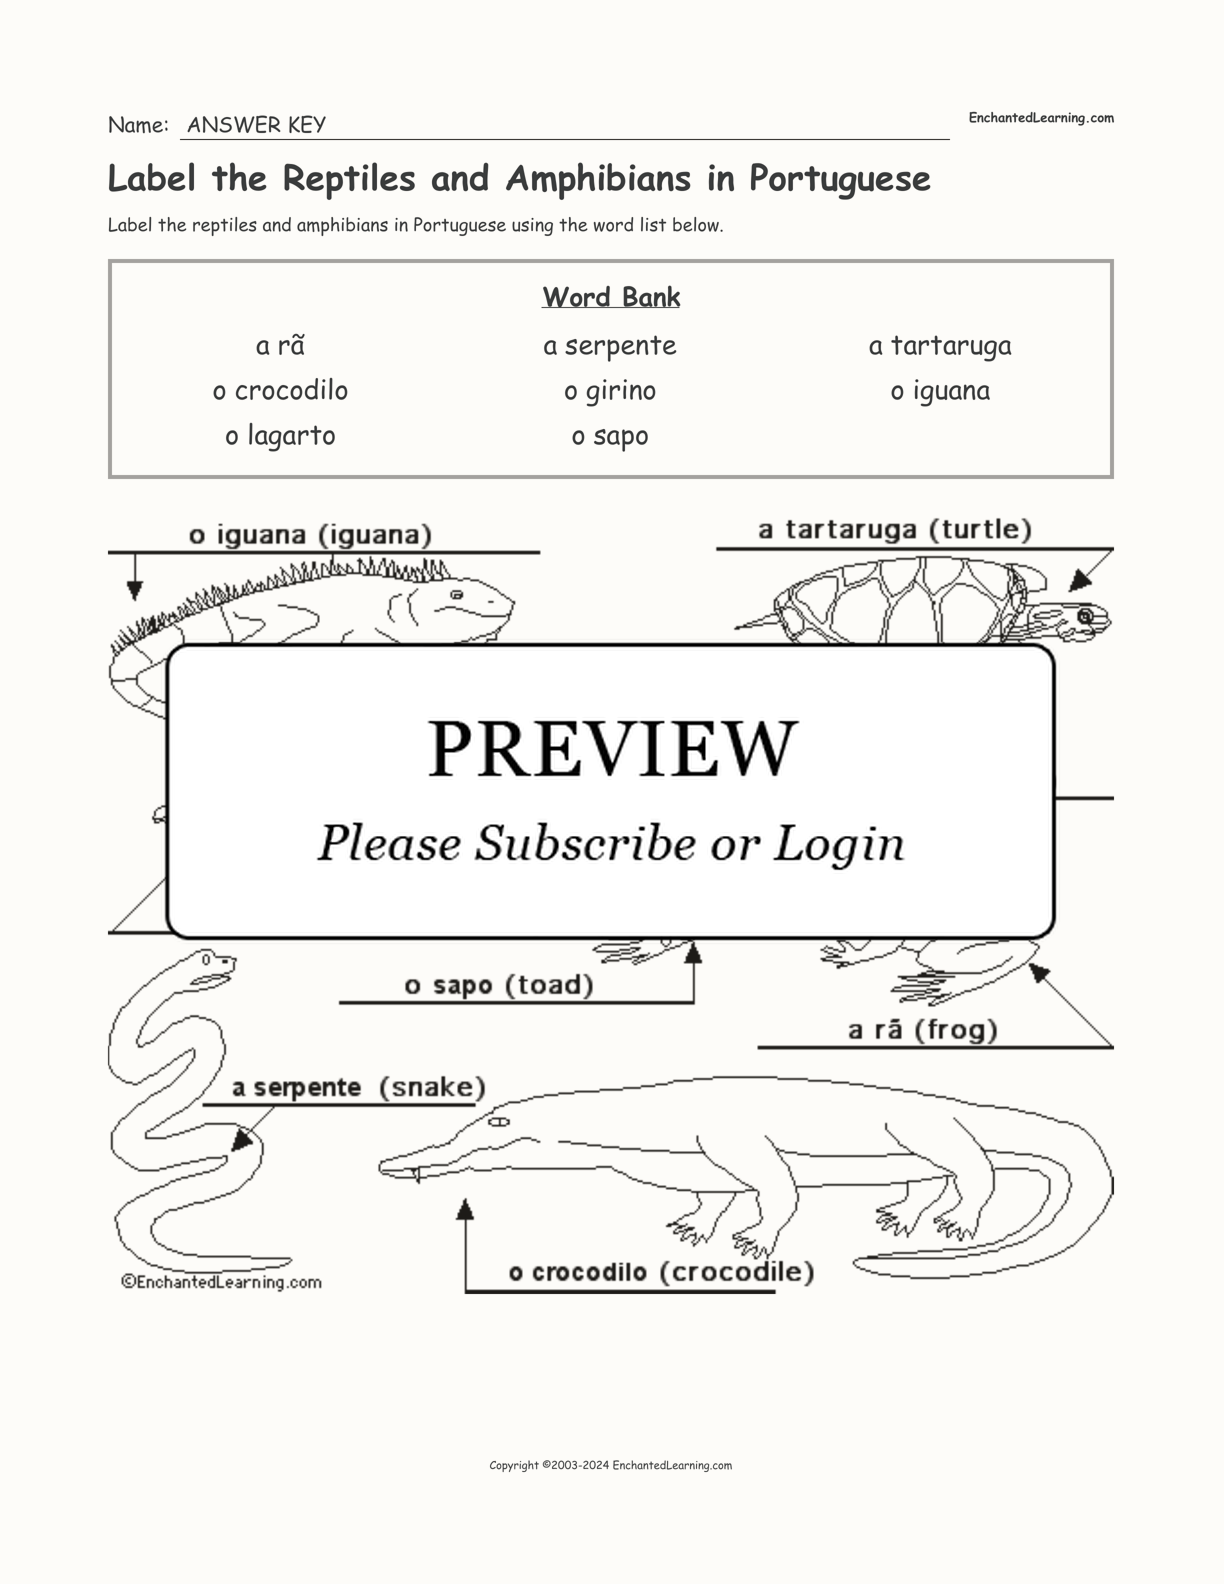 Label the Reptiles and Amphibians in Portuguese interactive worksheet page 2